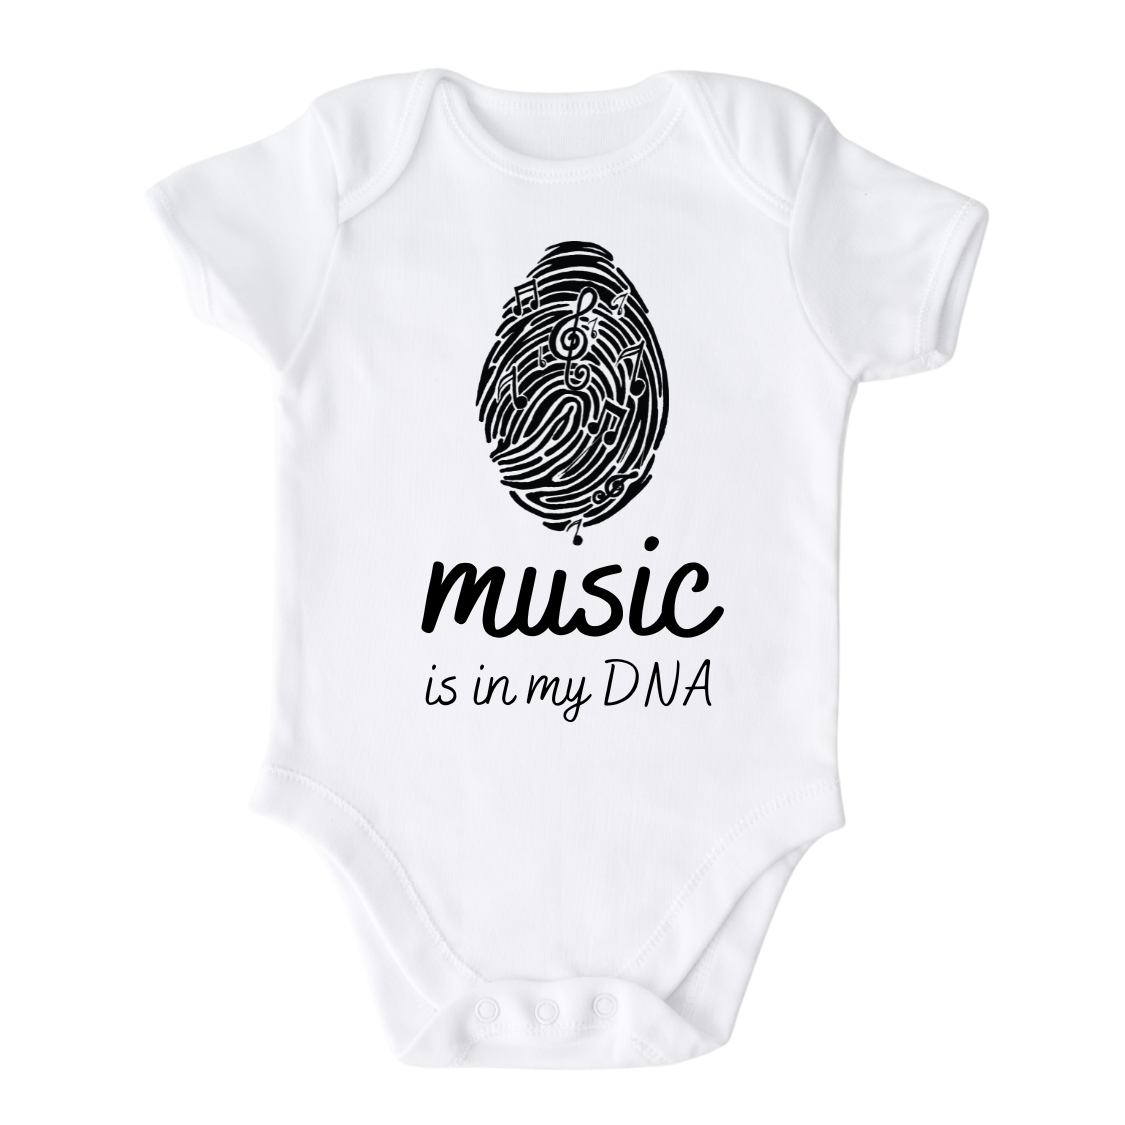 Baby Onesie® Music is In My DNA Baby Infant Clothing for Baby Shower Gift